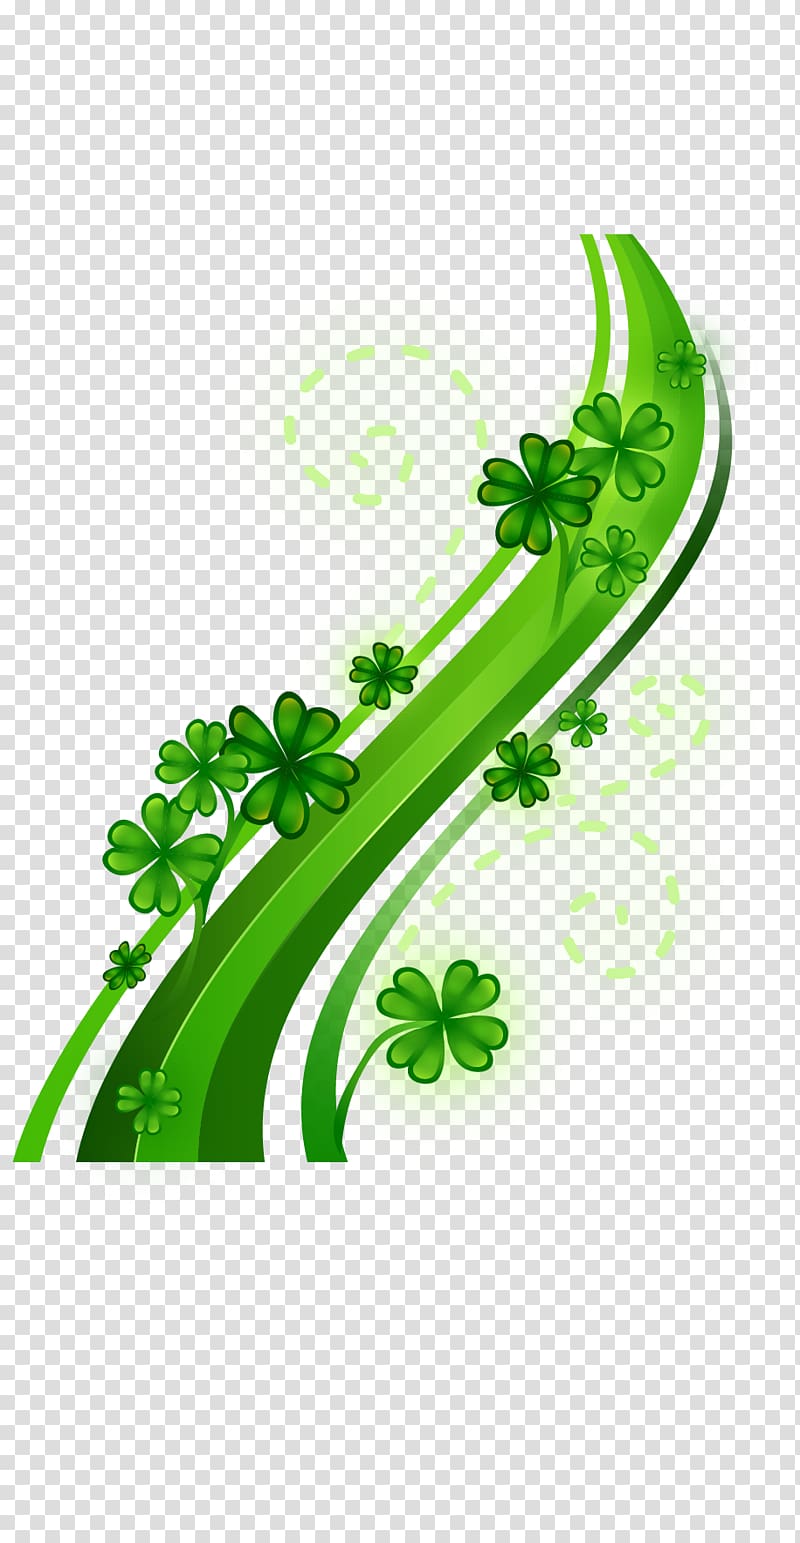 Cartoon painted fresh clover transparent background PNG clipart